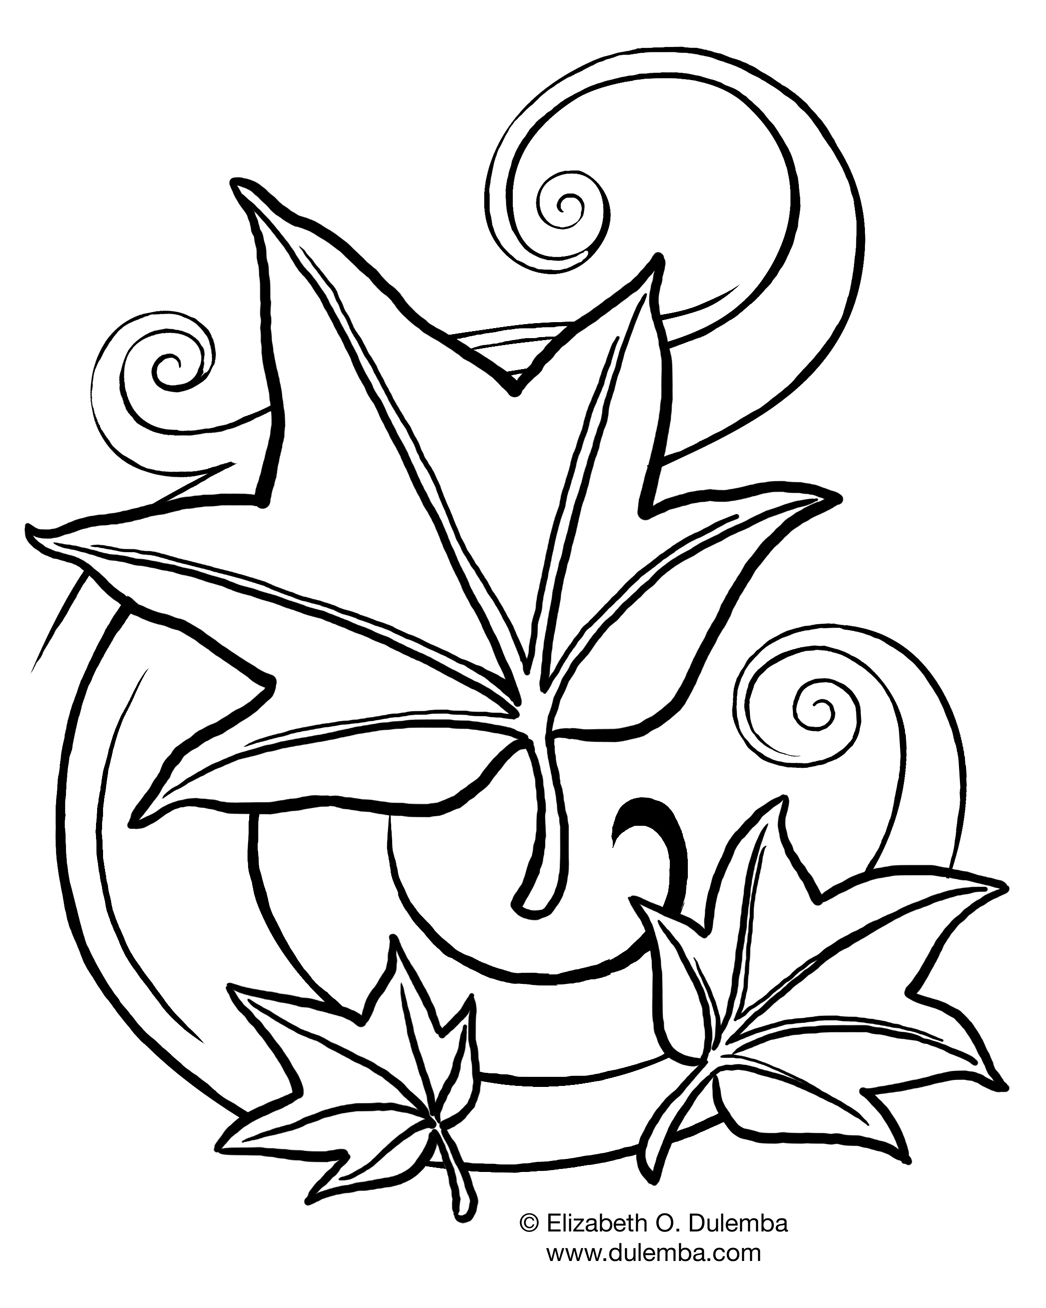 Download Free Fall Coloring Pages for Kids >> Disney Coloring Pages